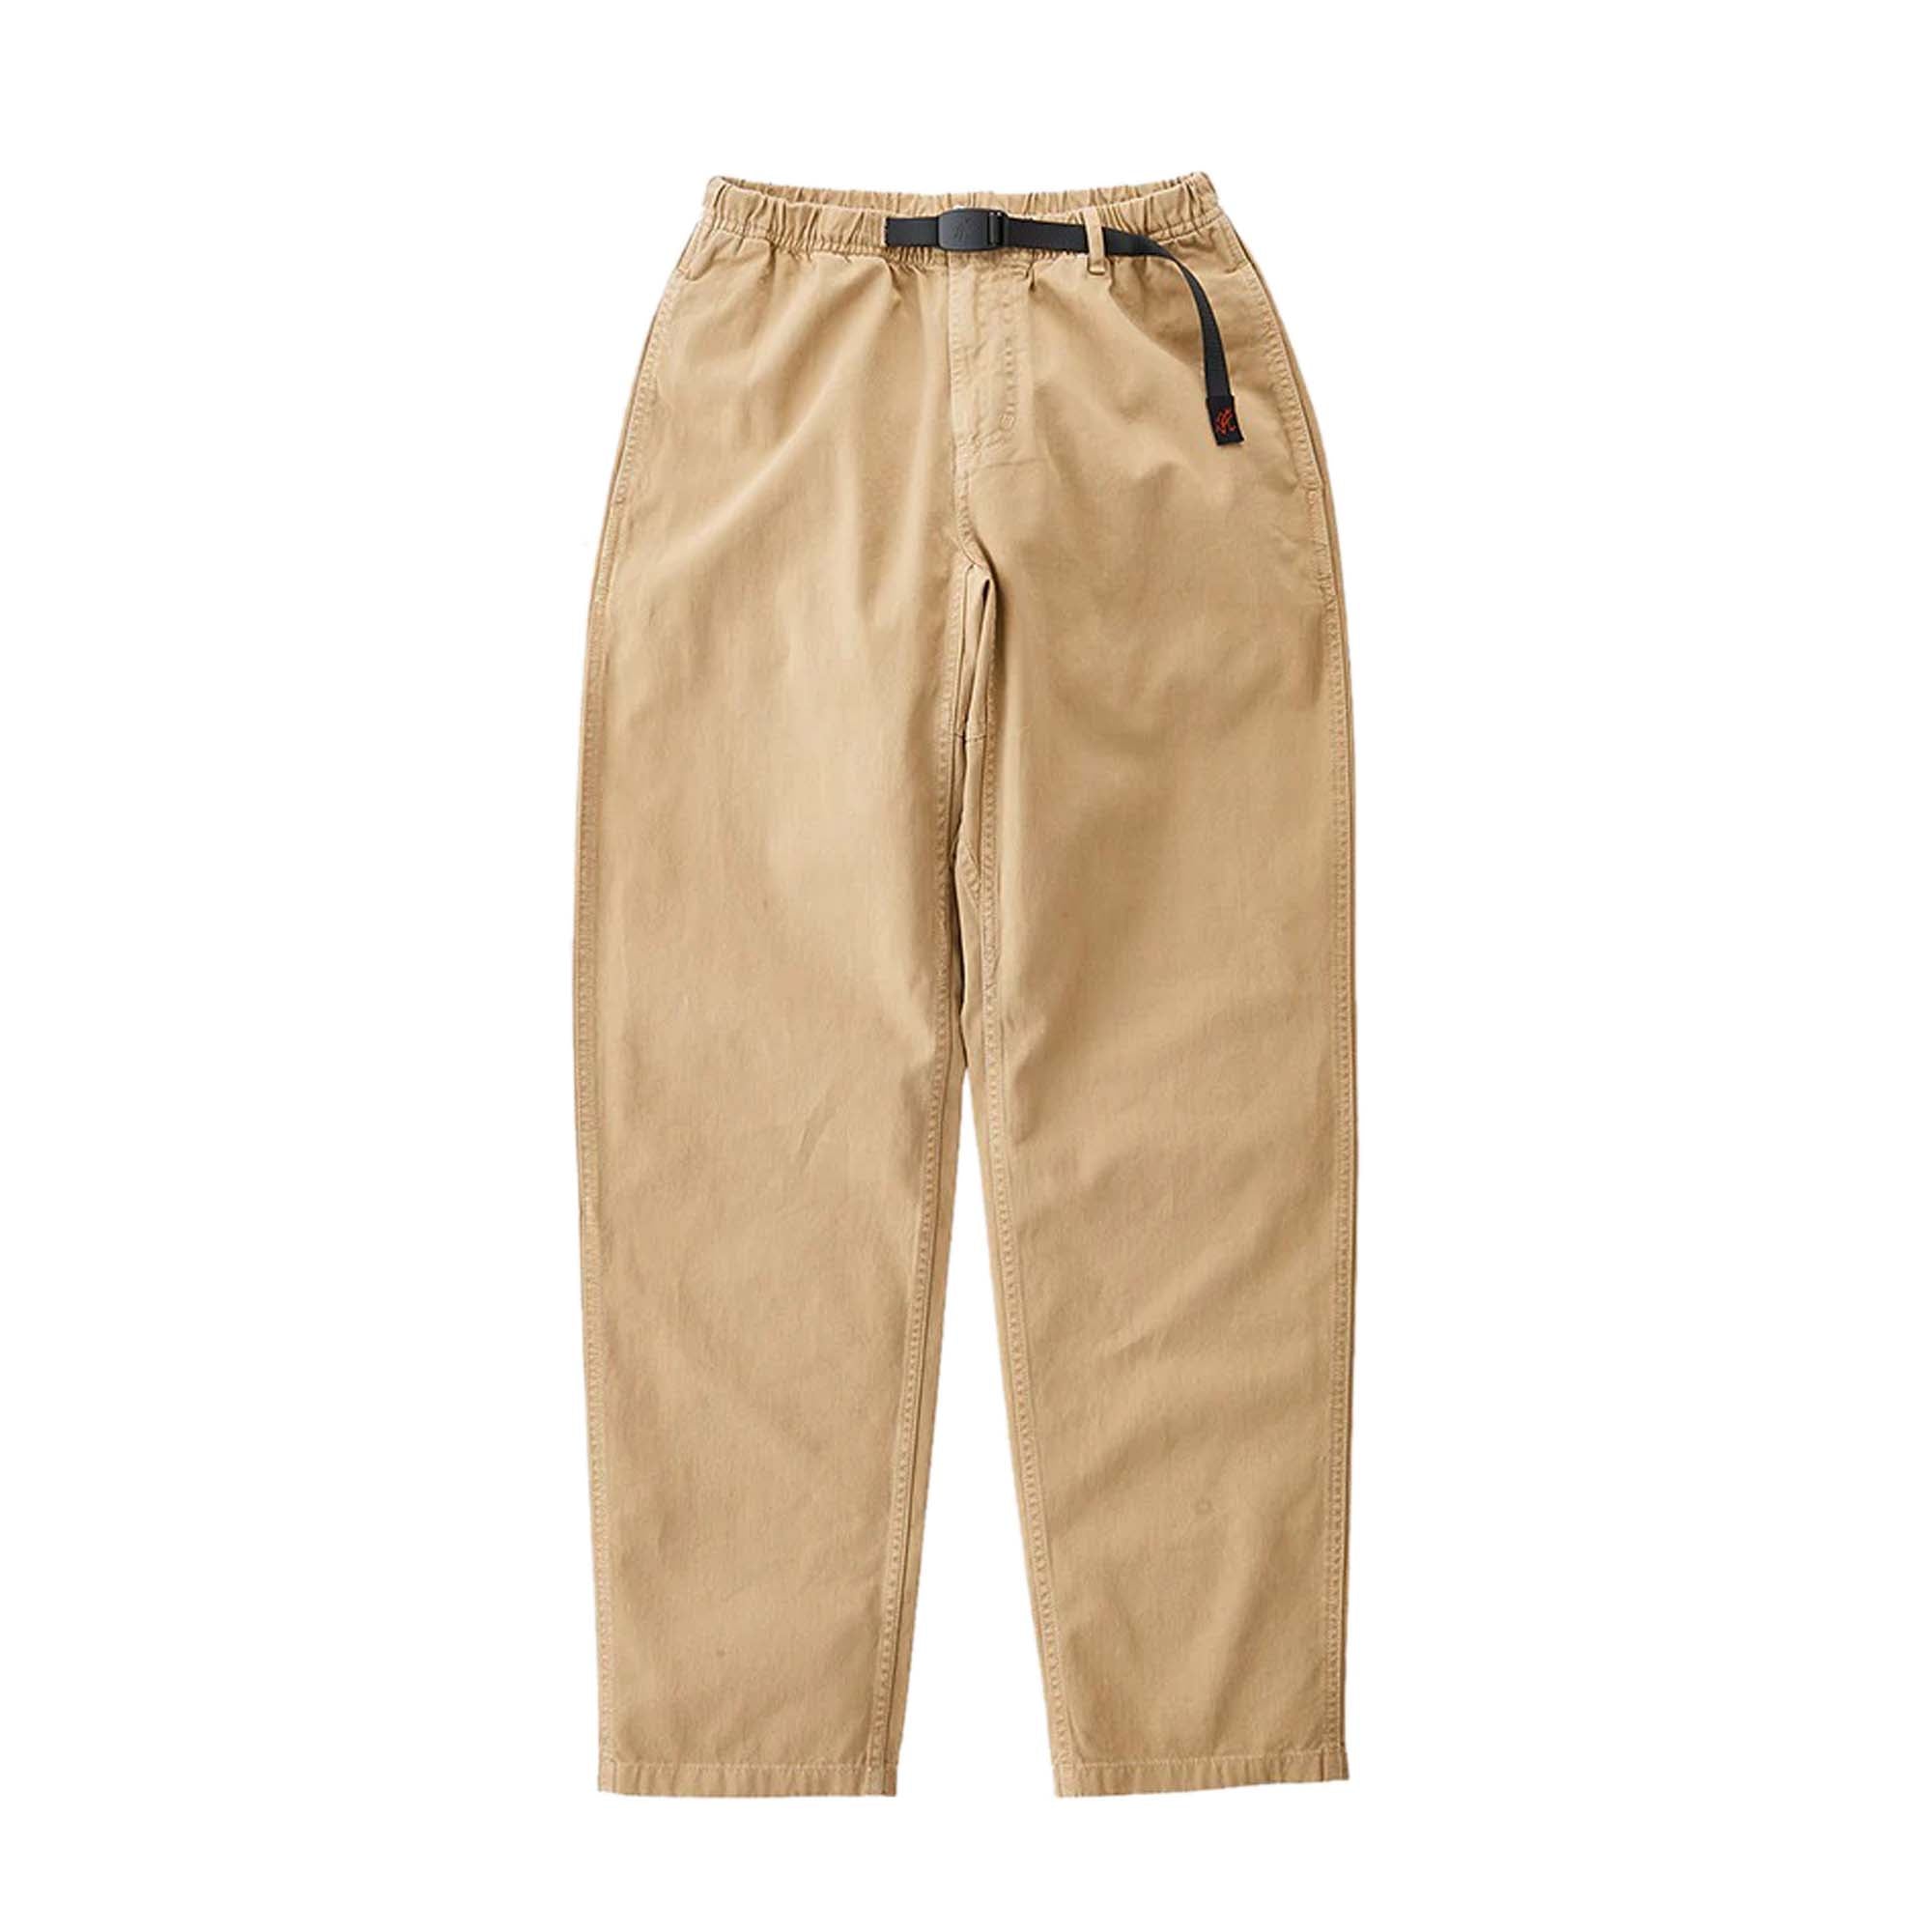 Buy Gramicci Men's Chino Pants Online – Extra Butter India